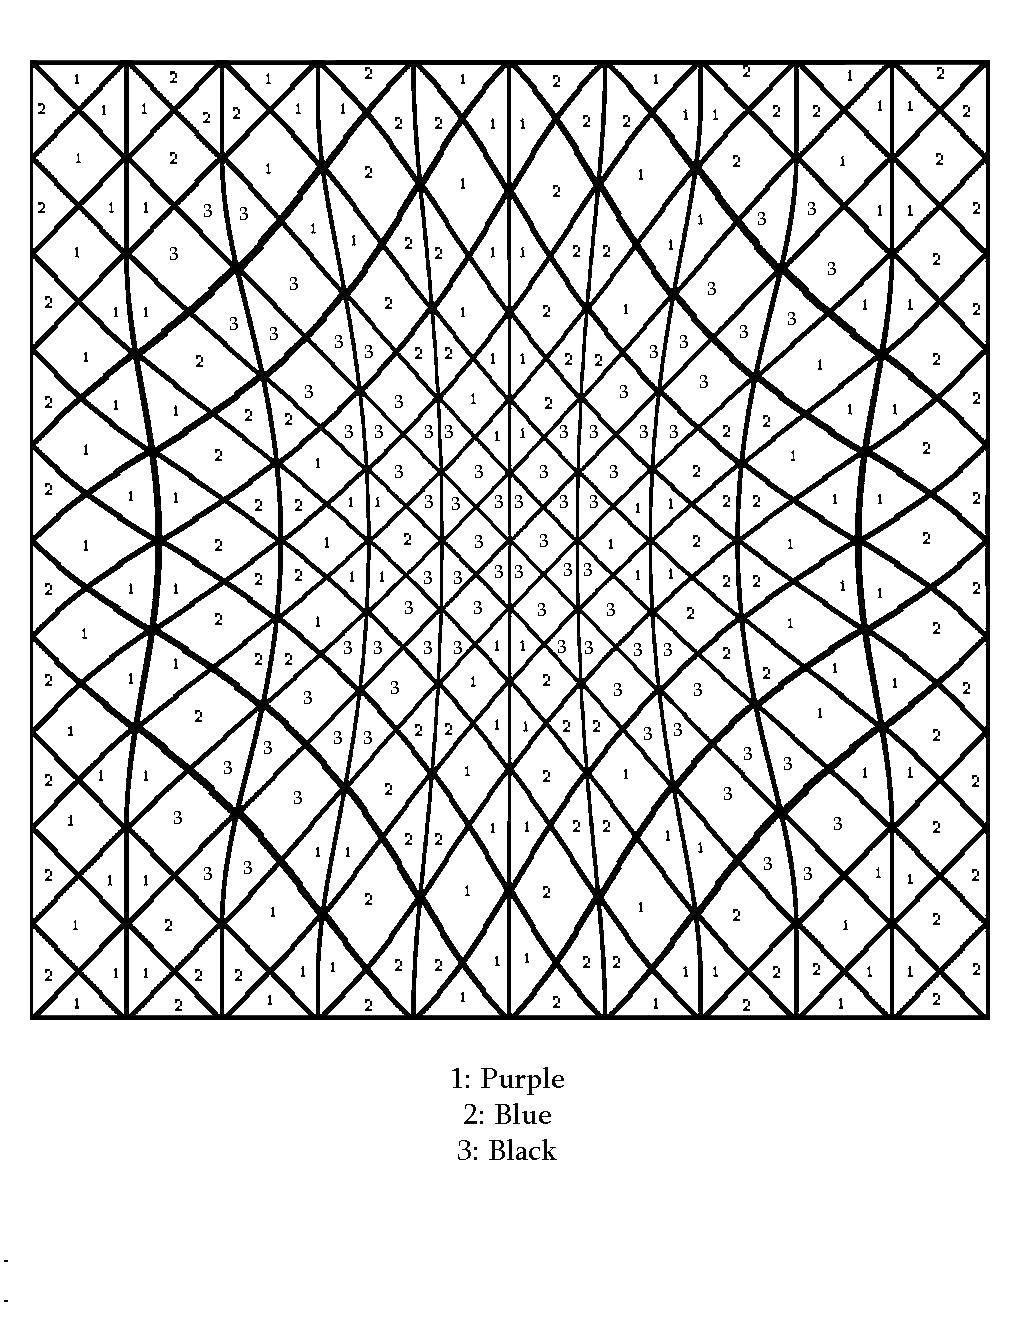 Coloring Math coloring pattern. Category mathematical coloring pages. Tags:  mathematical coloring pages.